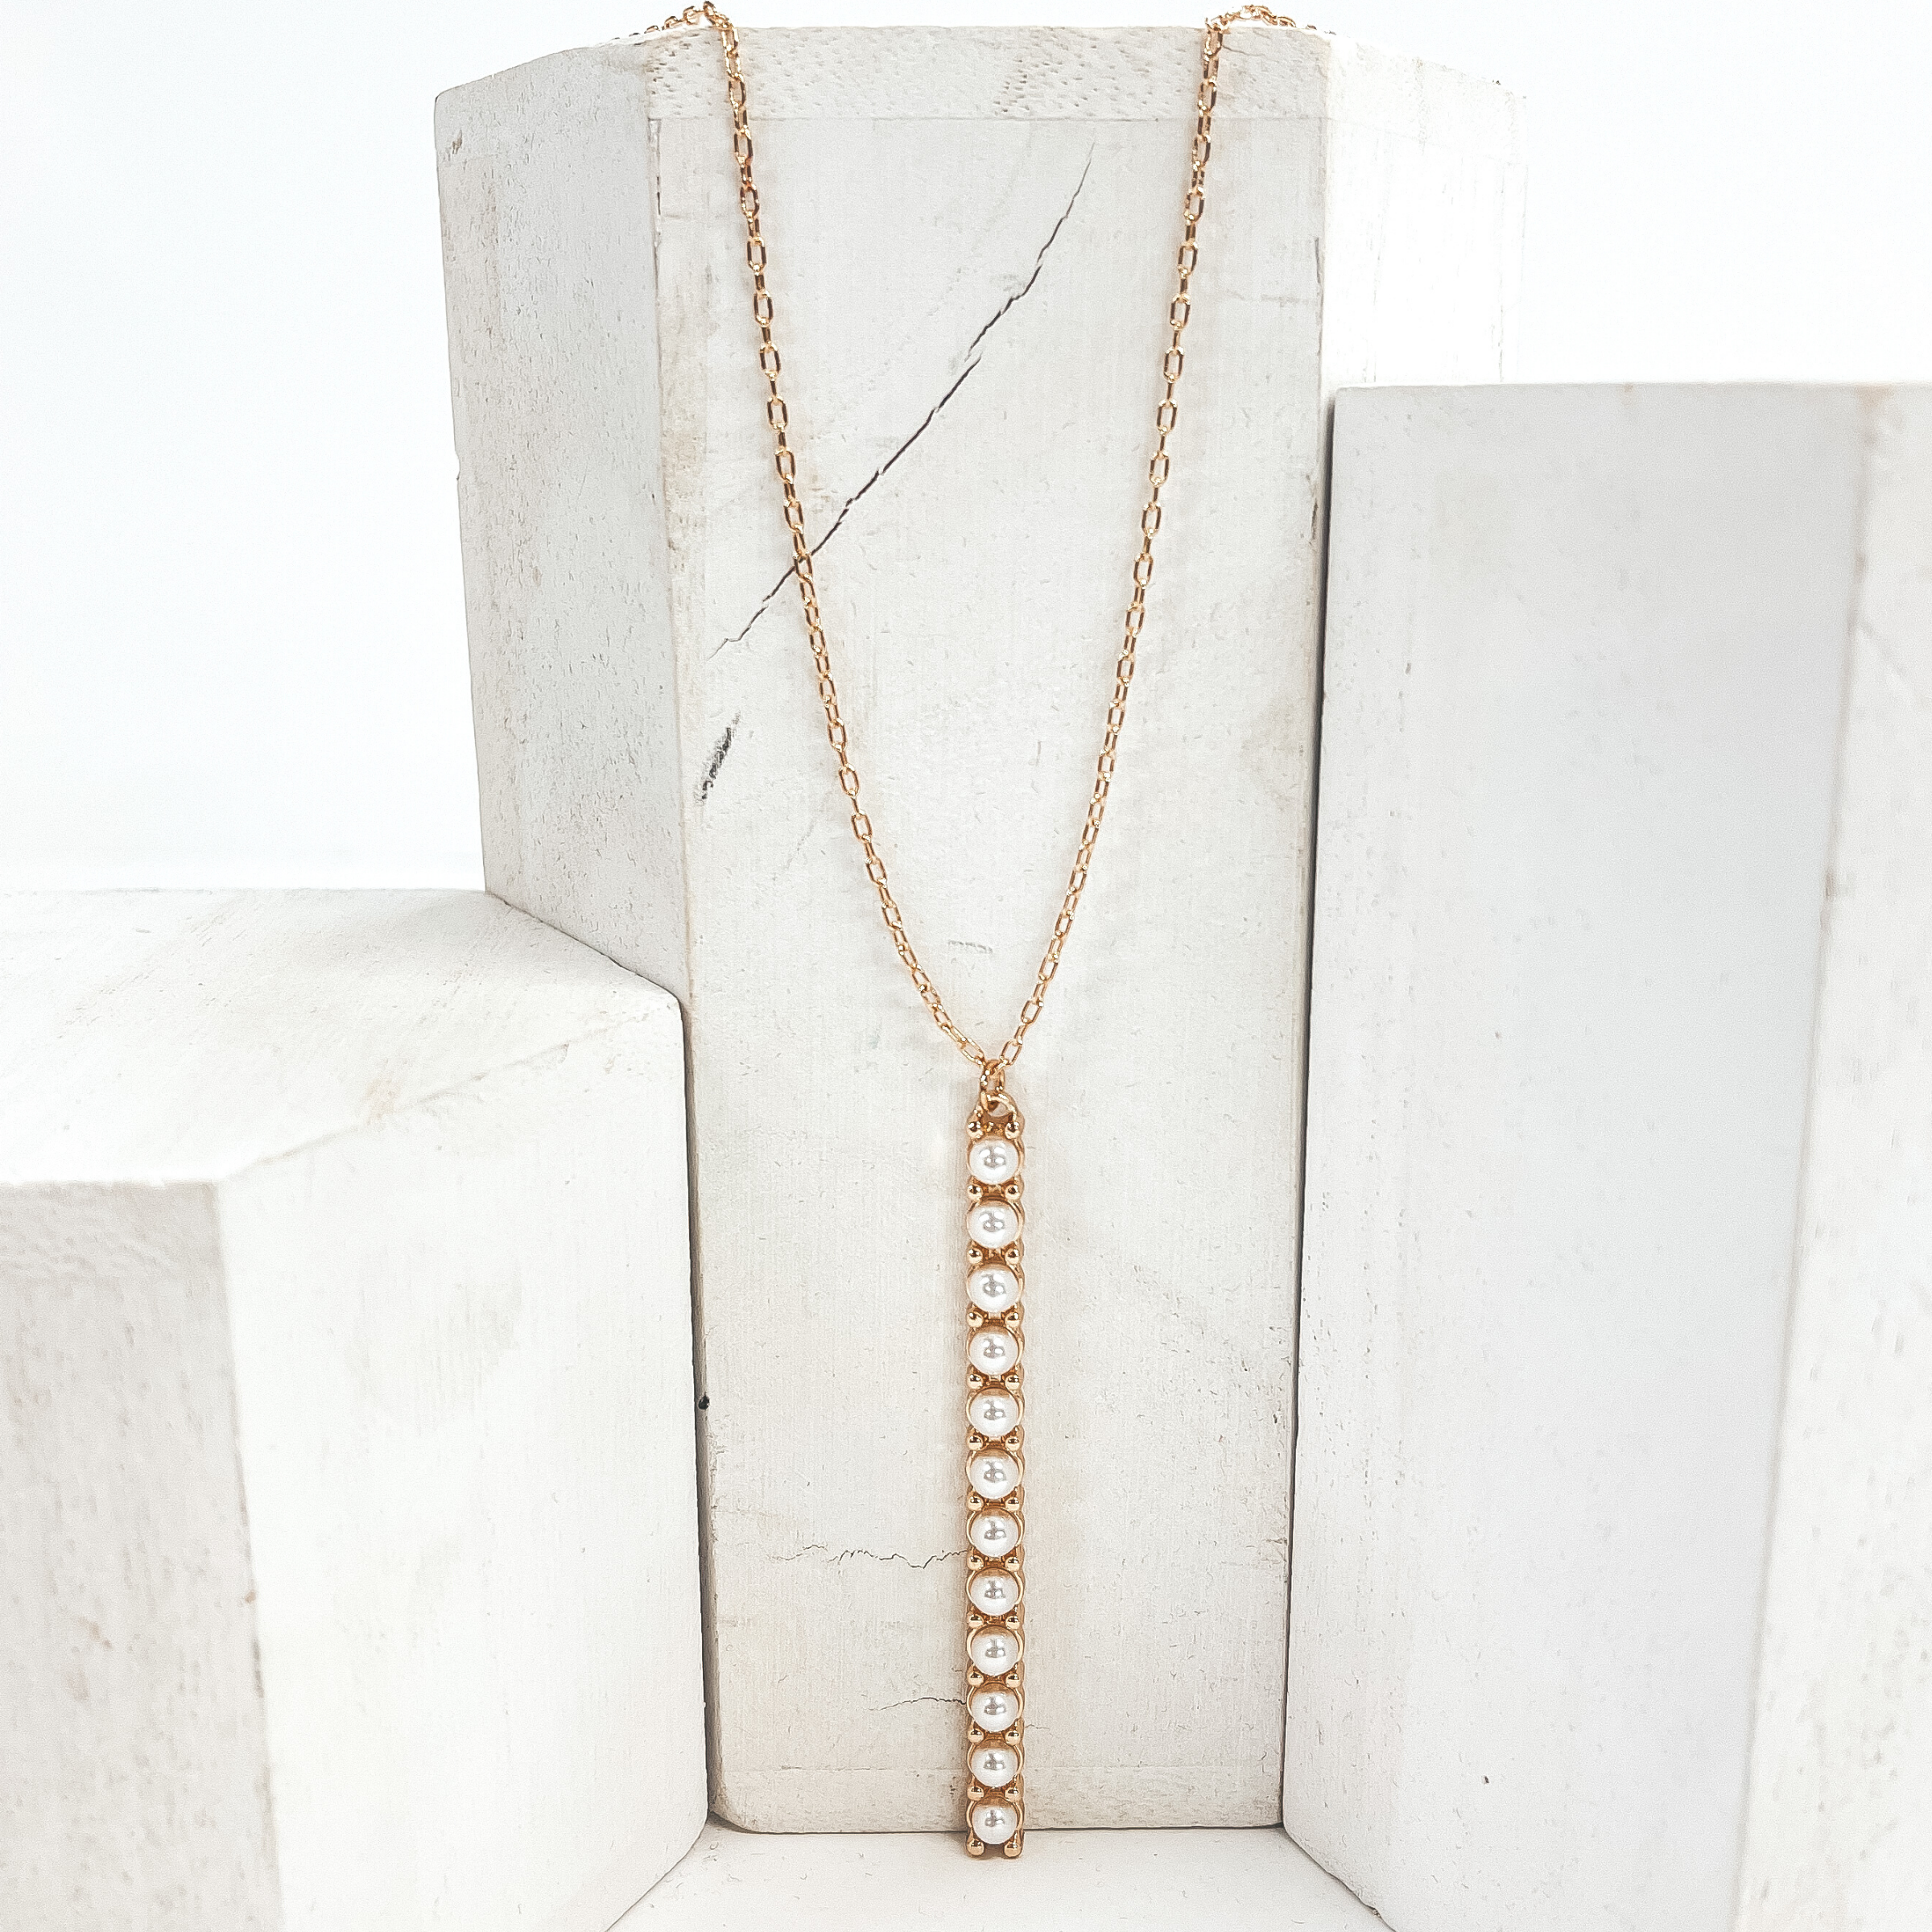 This is a 30 inch adjustable gold necklace with  a gold 2.75 inch bar pendant with pearls. This  necklace is pictured laying on a white block  on a white background with one white block on  each side.